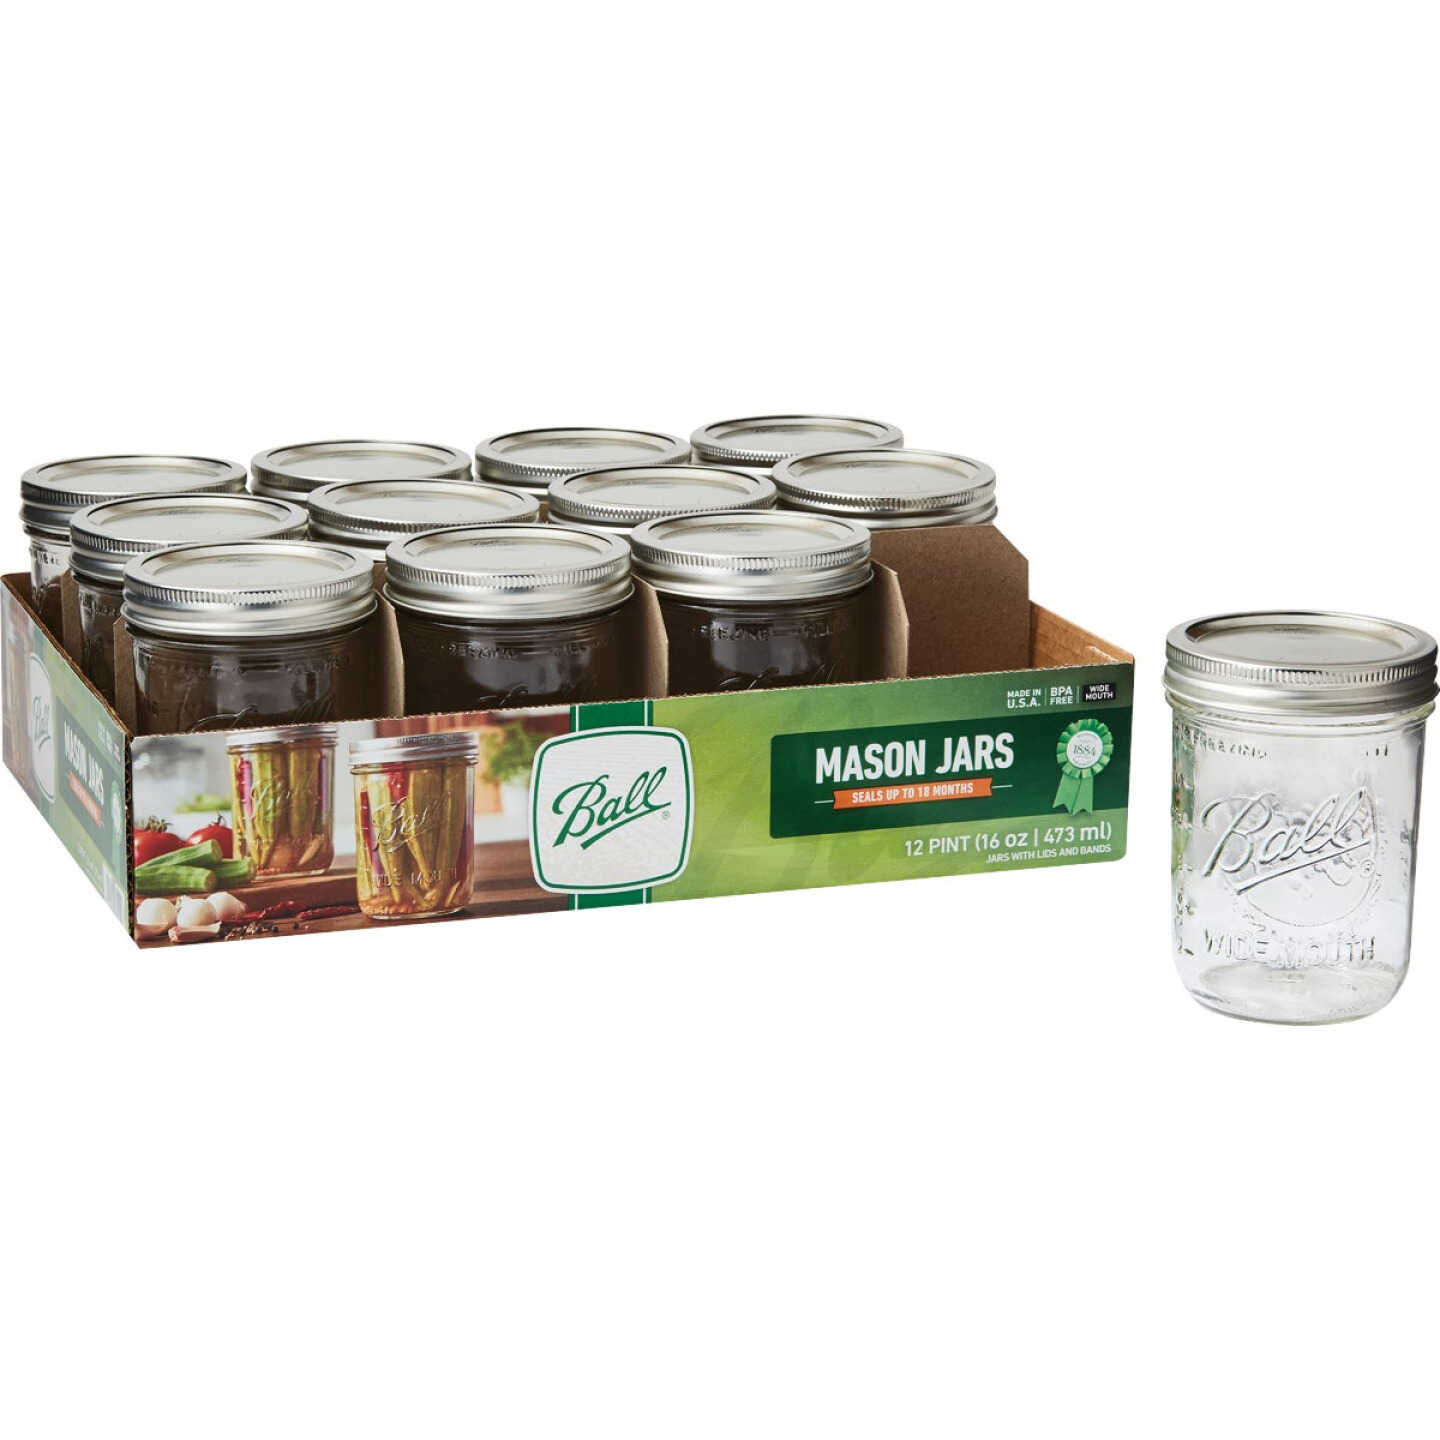 Choice 16 oz. Pint Wide Mouth Canning / Mason Jar with Silver Metal Lid and  Band - 12/Pack